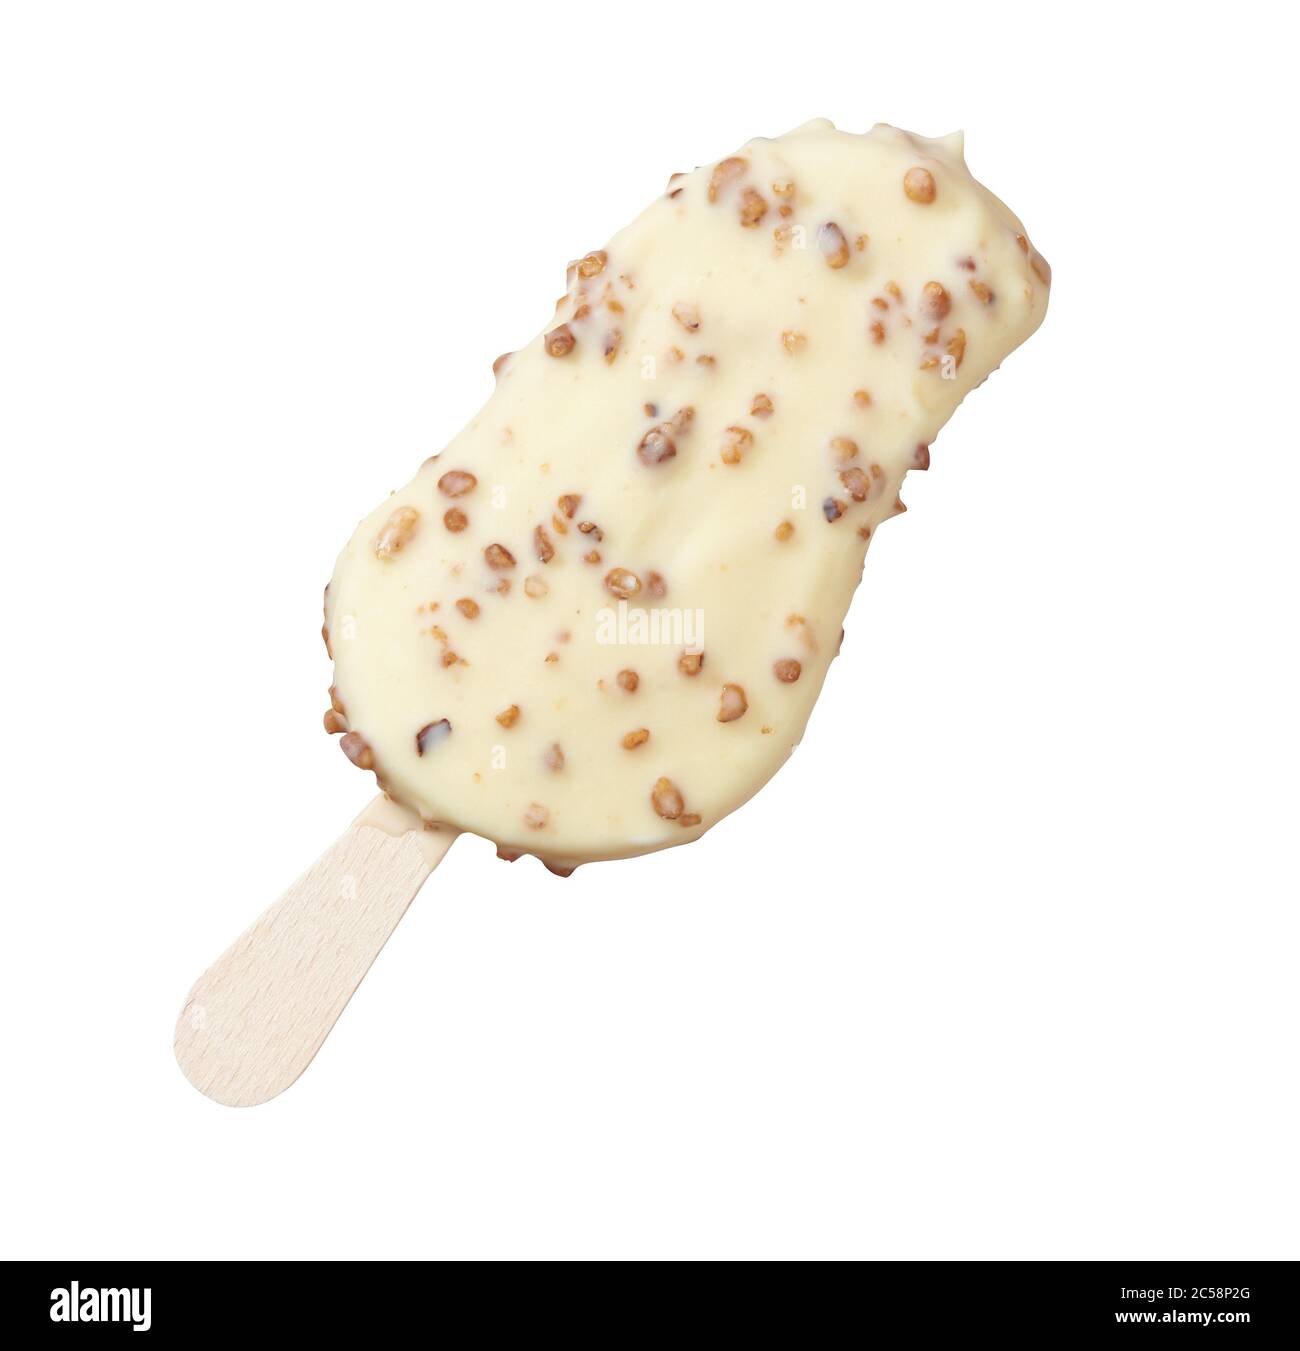 White chocolate ice cream popsicle with peanuts Stock Photo